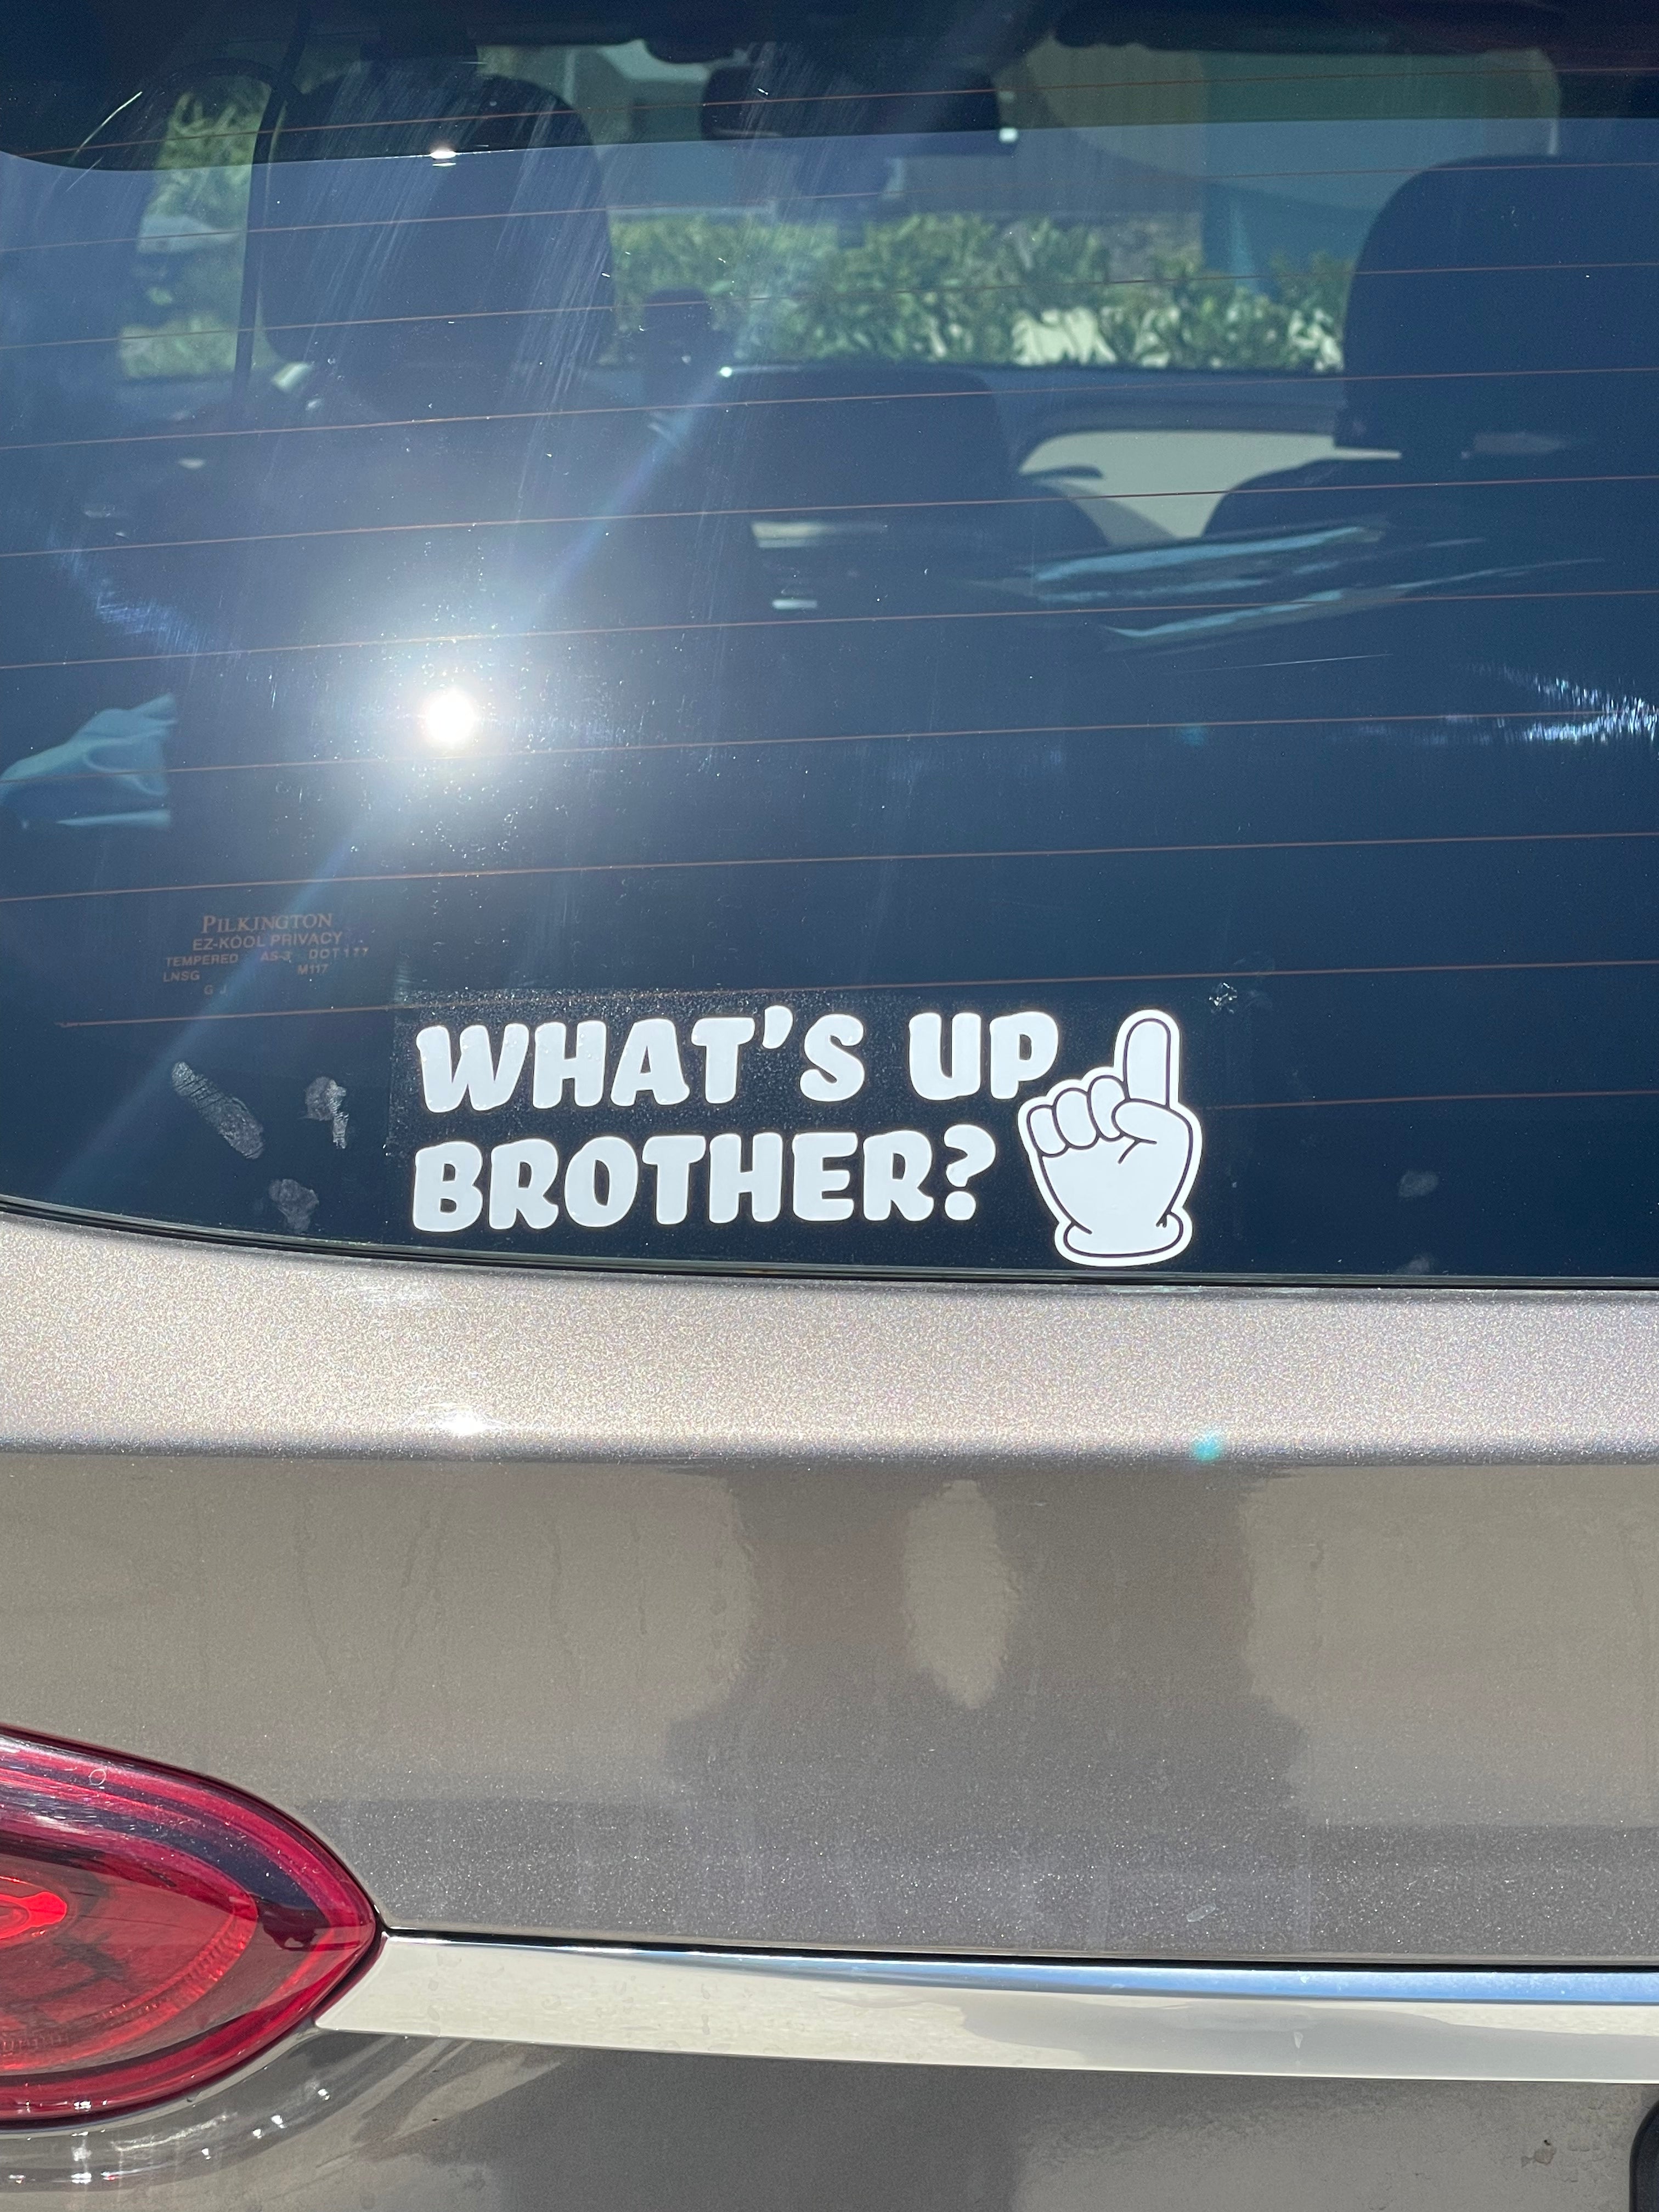 What's Up Brother? vinyl decal. Get this viral Sketch phrase decal for you car, truck, or computer